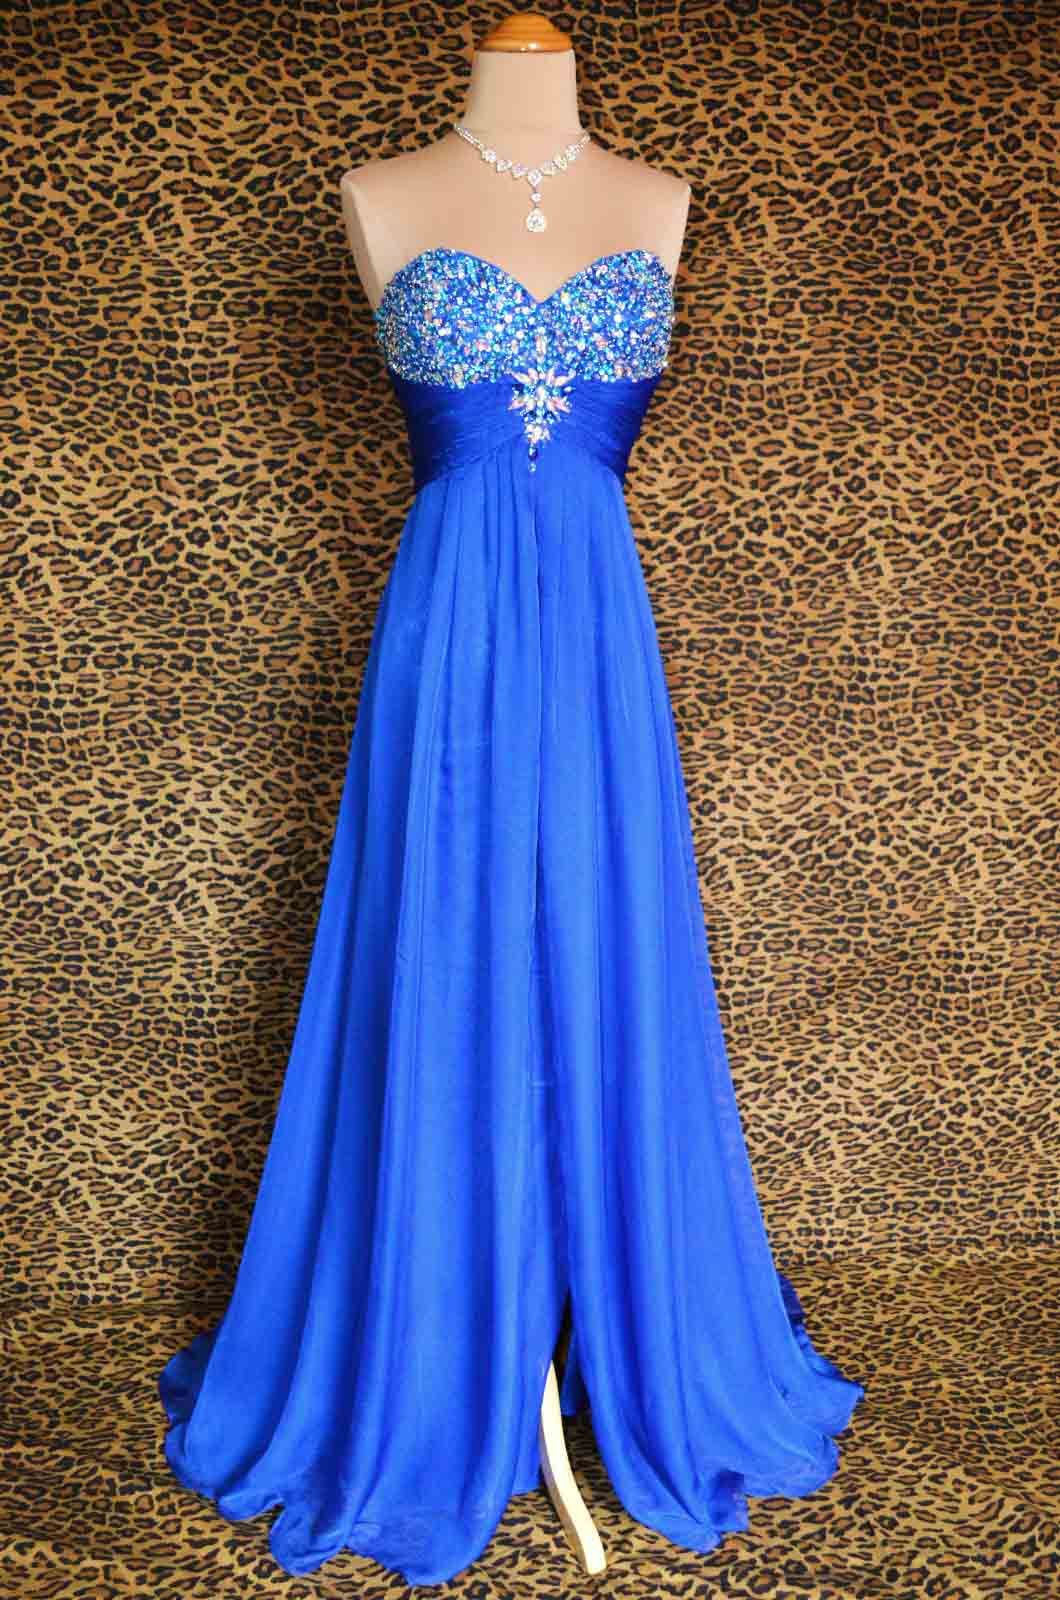 New Style Sexy Royal Blue Evening Dresses A Line Strapless Beaded